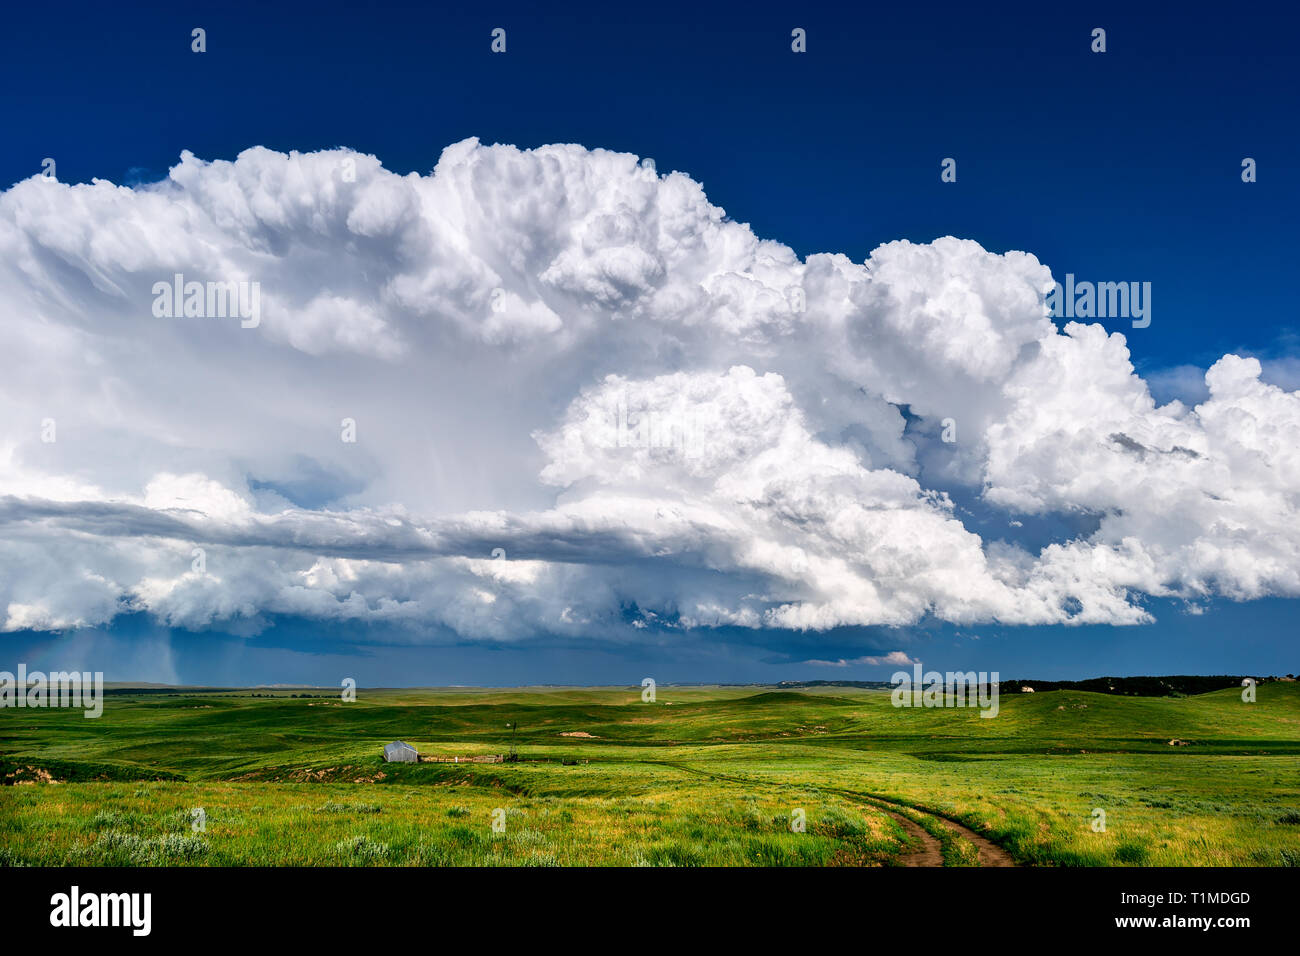 Scenic landscape with dramatic cumulonimbus clouds in the sky as a summer thunderstorm develops near Lusk, Wyoming Stock Photo